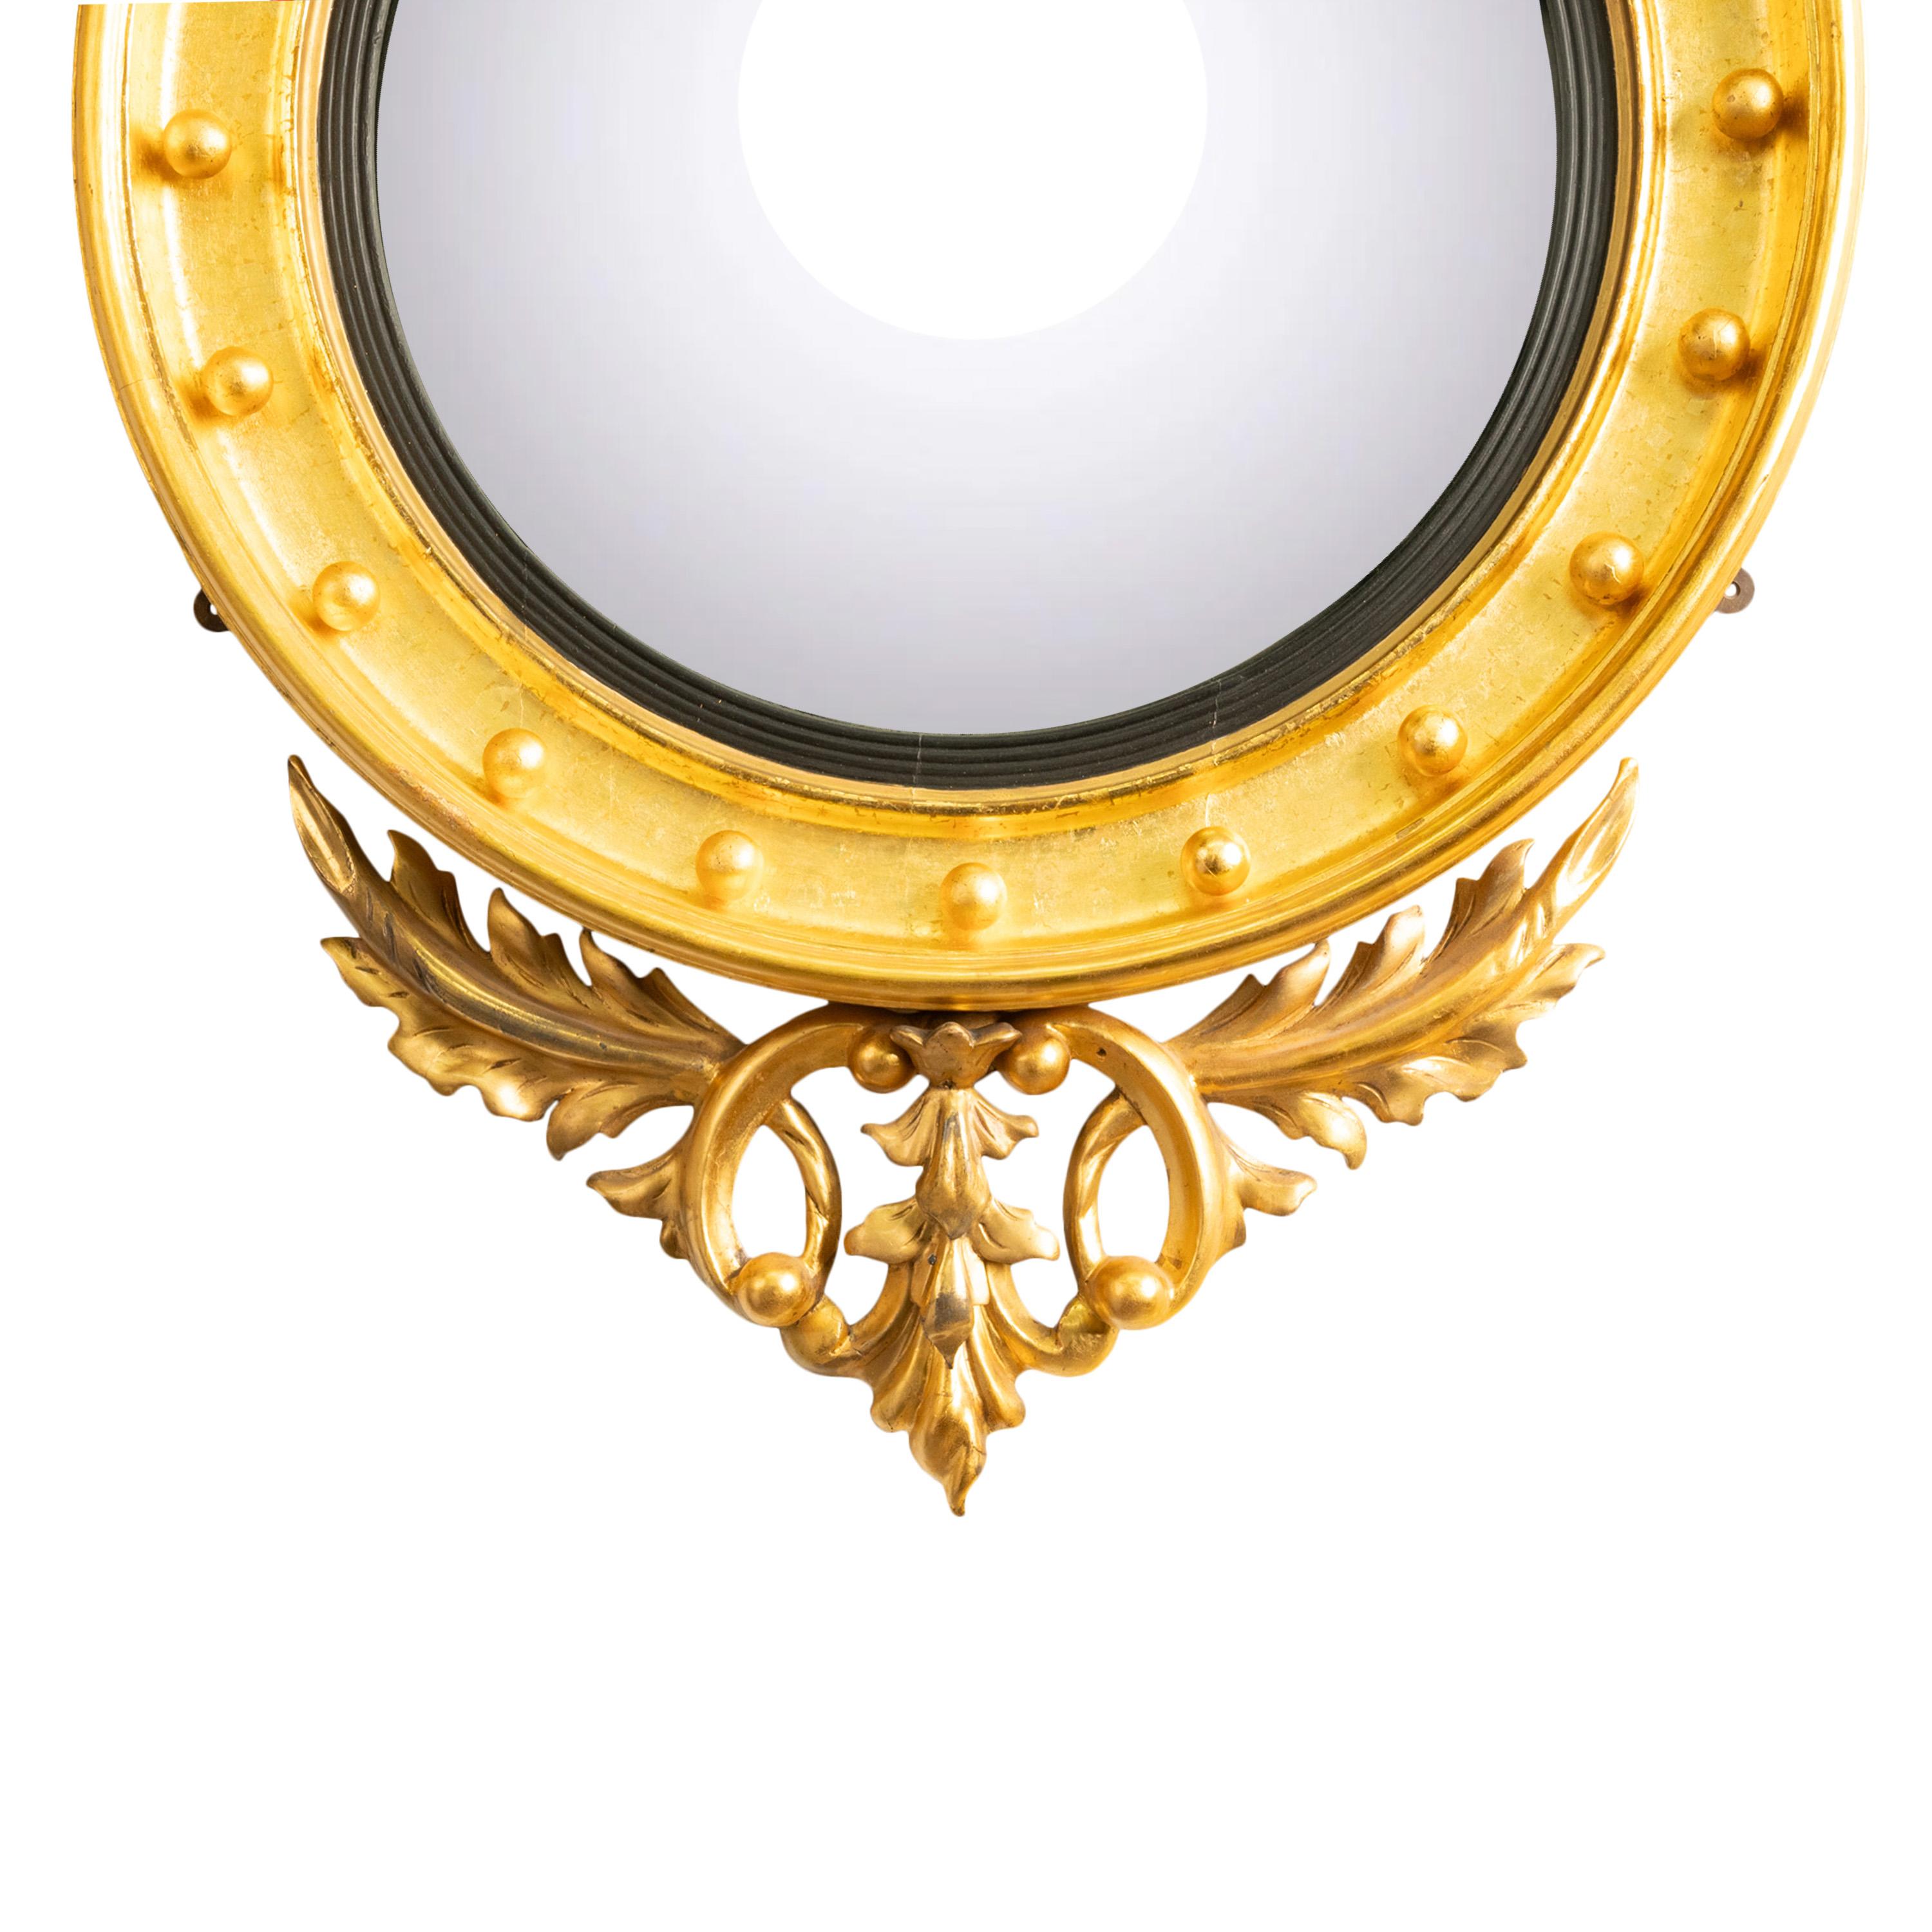 Antique Early 19thC American Federal Period Convex Gilt Wood Eagle Mirror 1820 For Sale 2